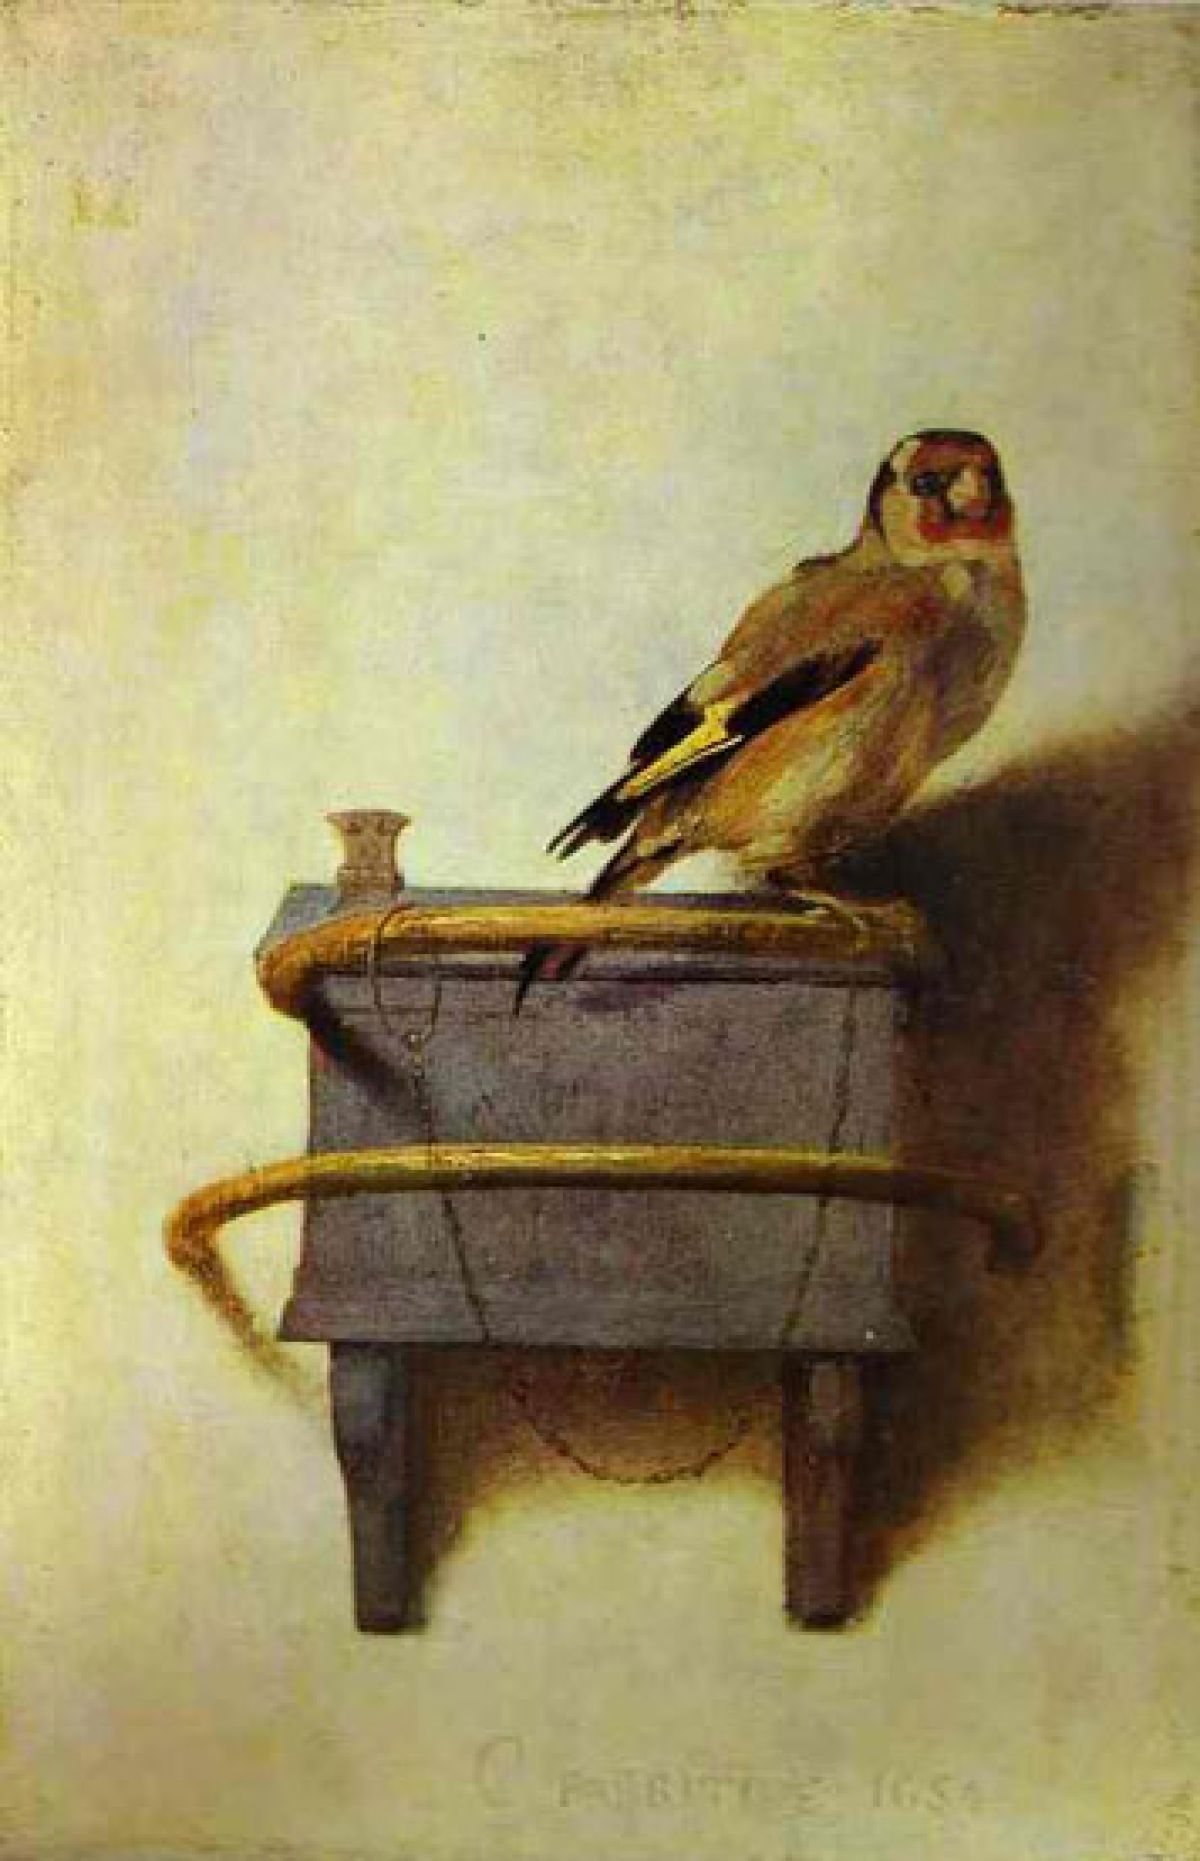 Review: The Goldfinch